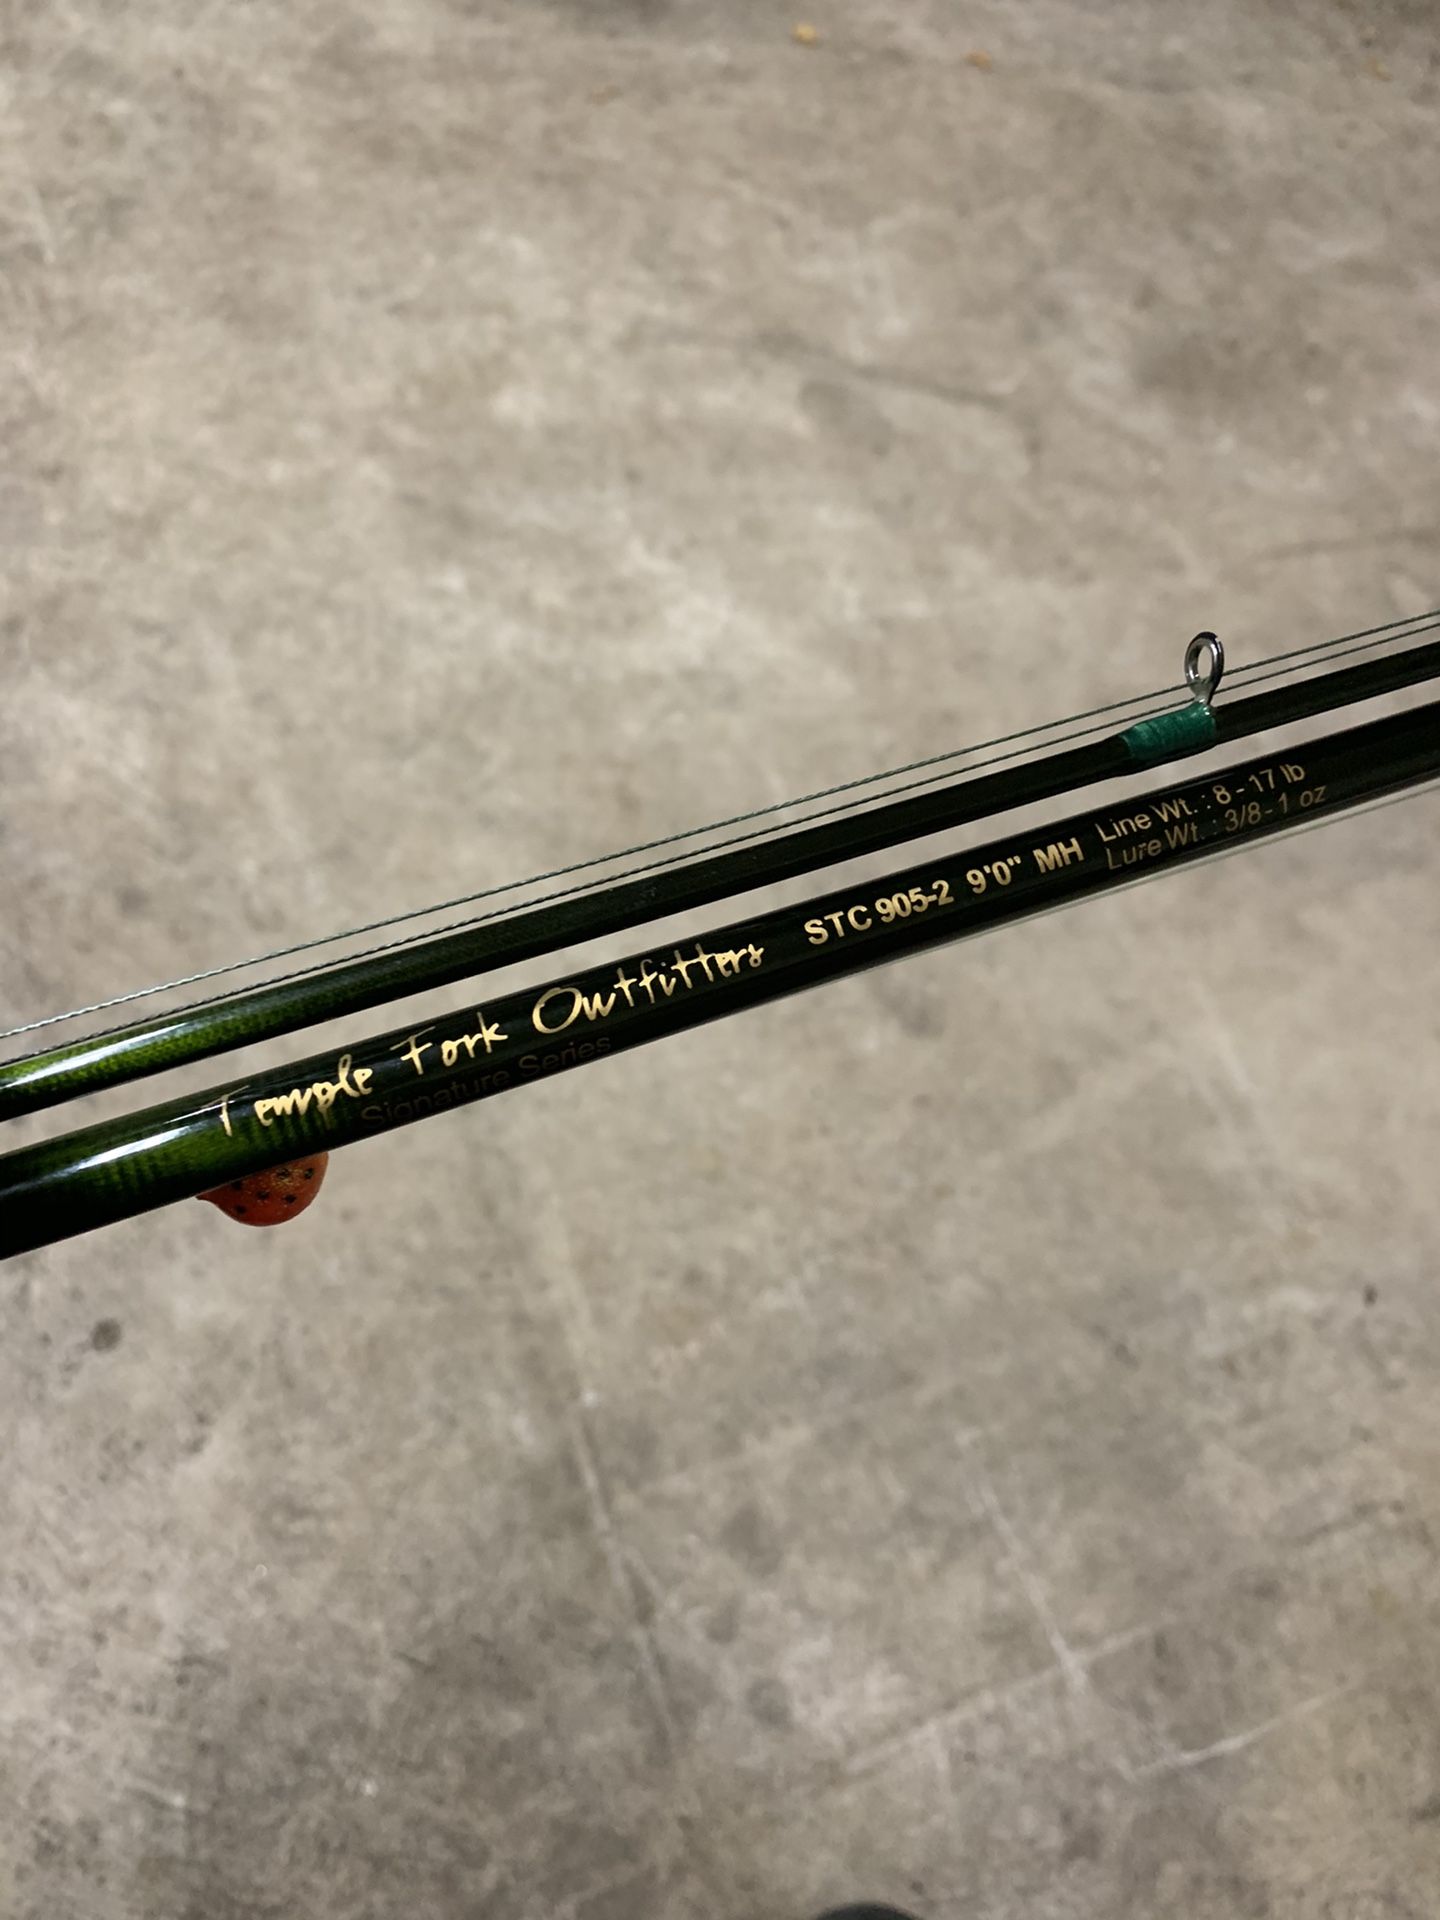 Temple Fork Outfitter 9’ Line wait 8-17lbs With Abu García Right Hand 5500 Reel